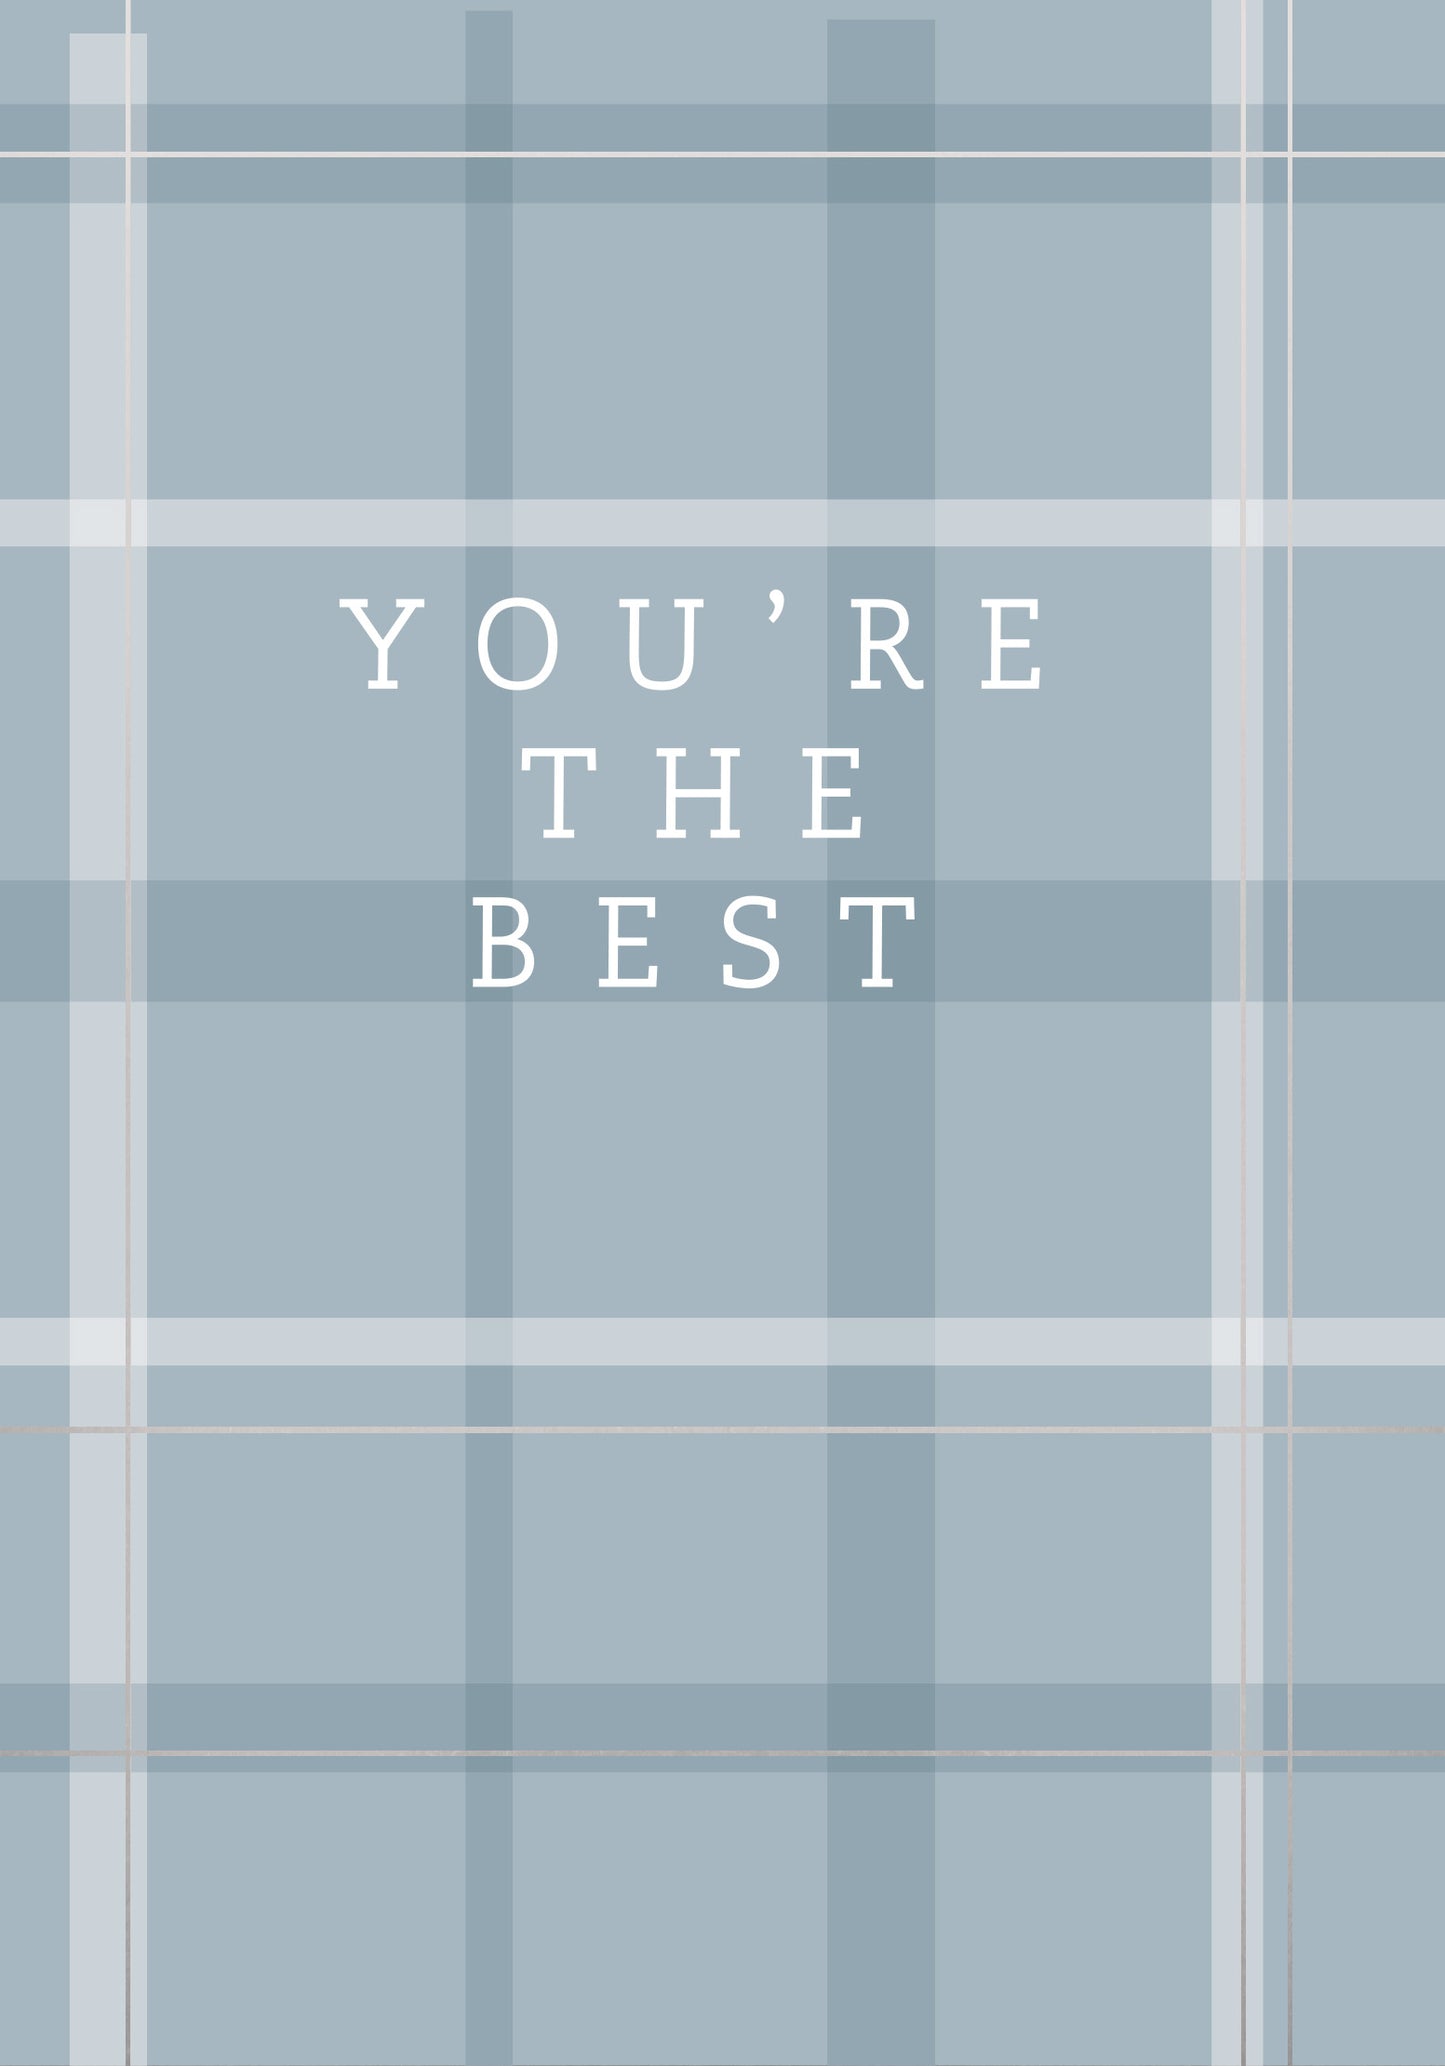 Greeting Card - Best Check